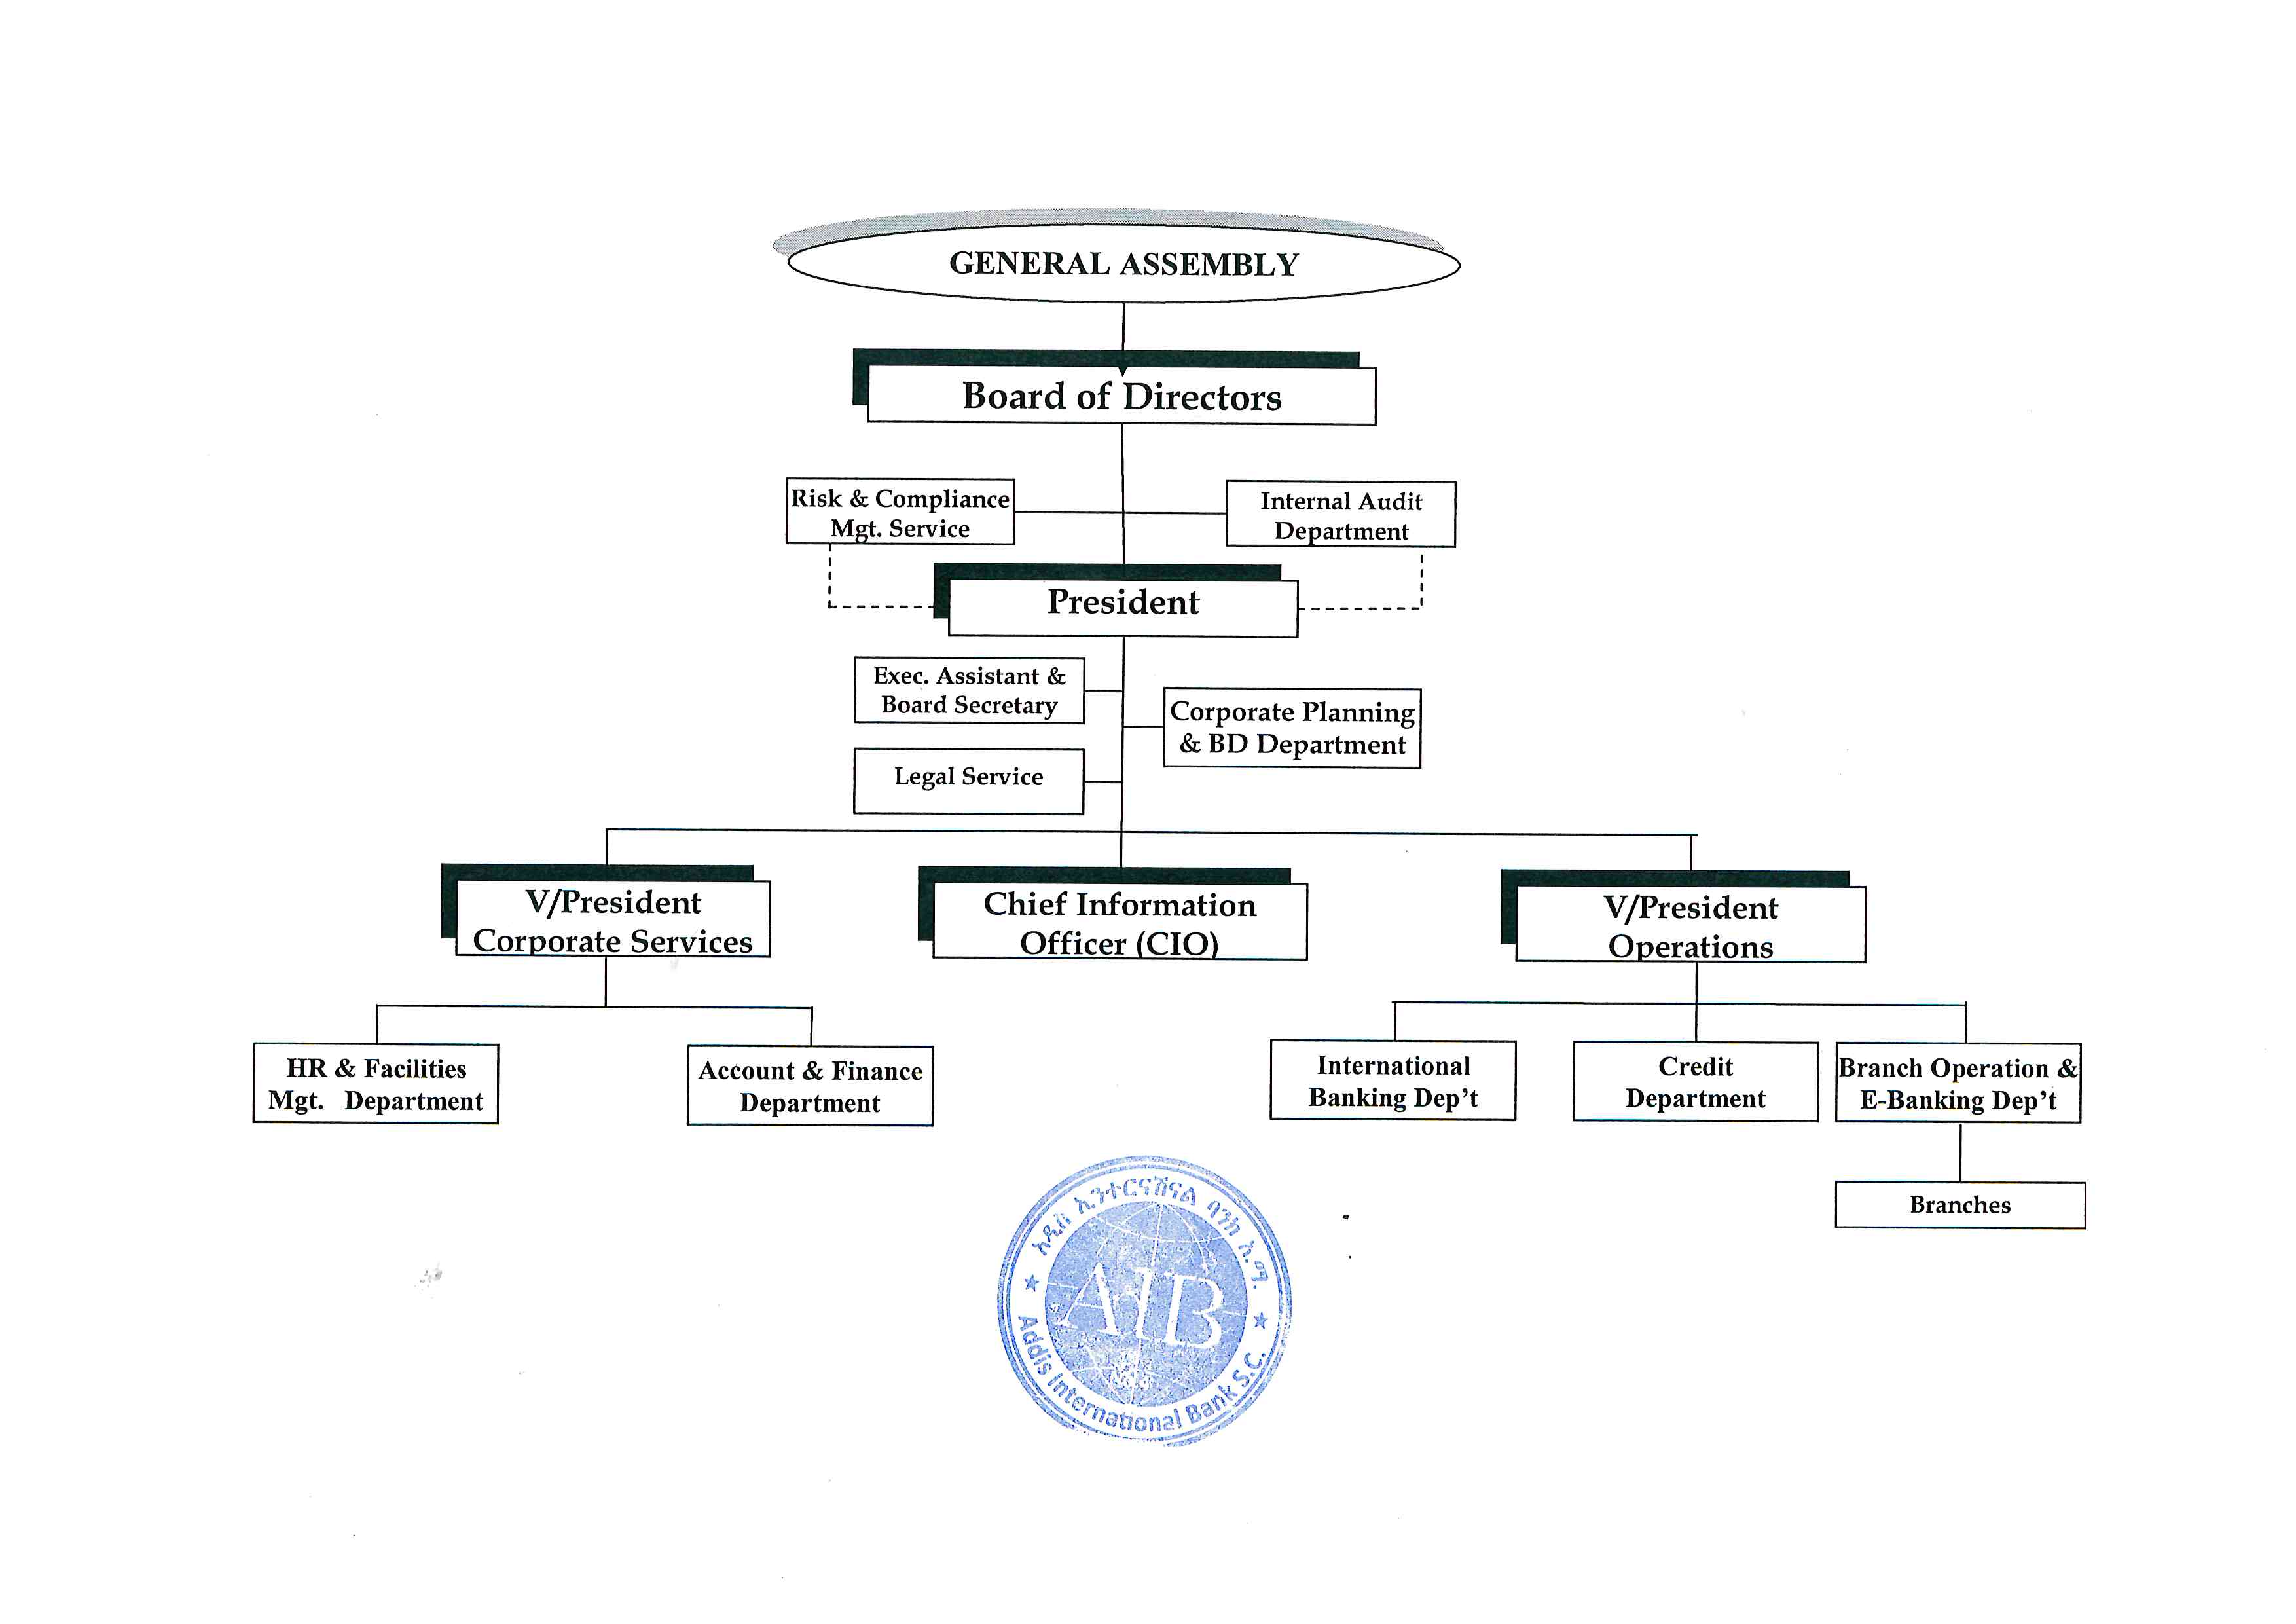 Bank department. Organizational structure of Banks. Structure of International Bank. Bank Organization information structure. Organizational Chart of Bank of Italy.